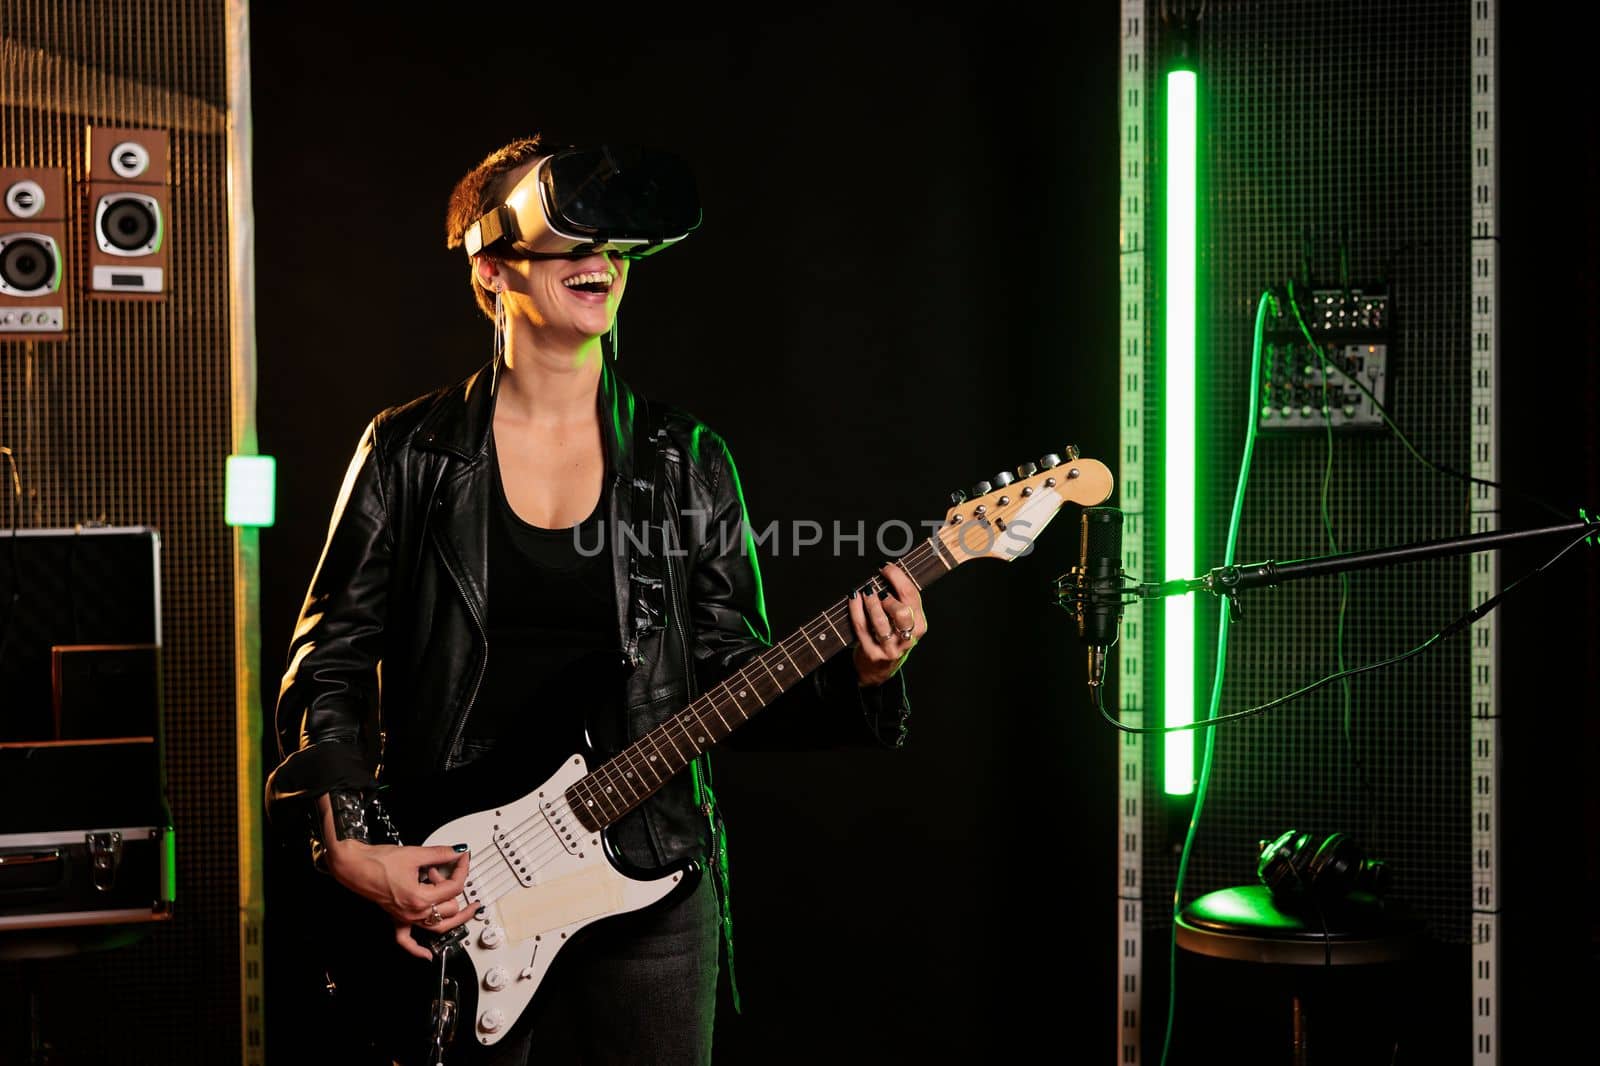 Guitarist with virtual reality headset enjoying rock concert simulation while playing heavy metal song at electric guitar in music studio. Woman musician performing grunge album using electricinstrument